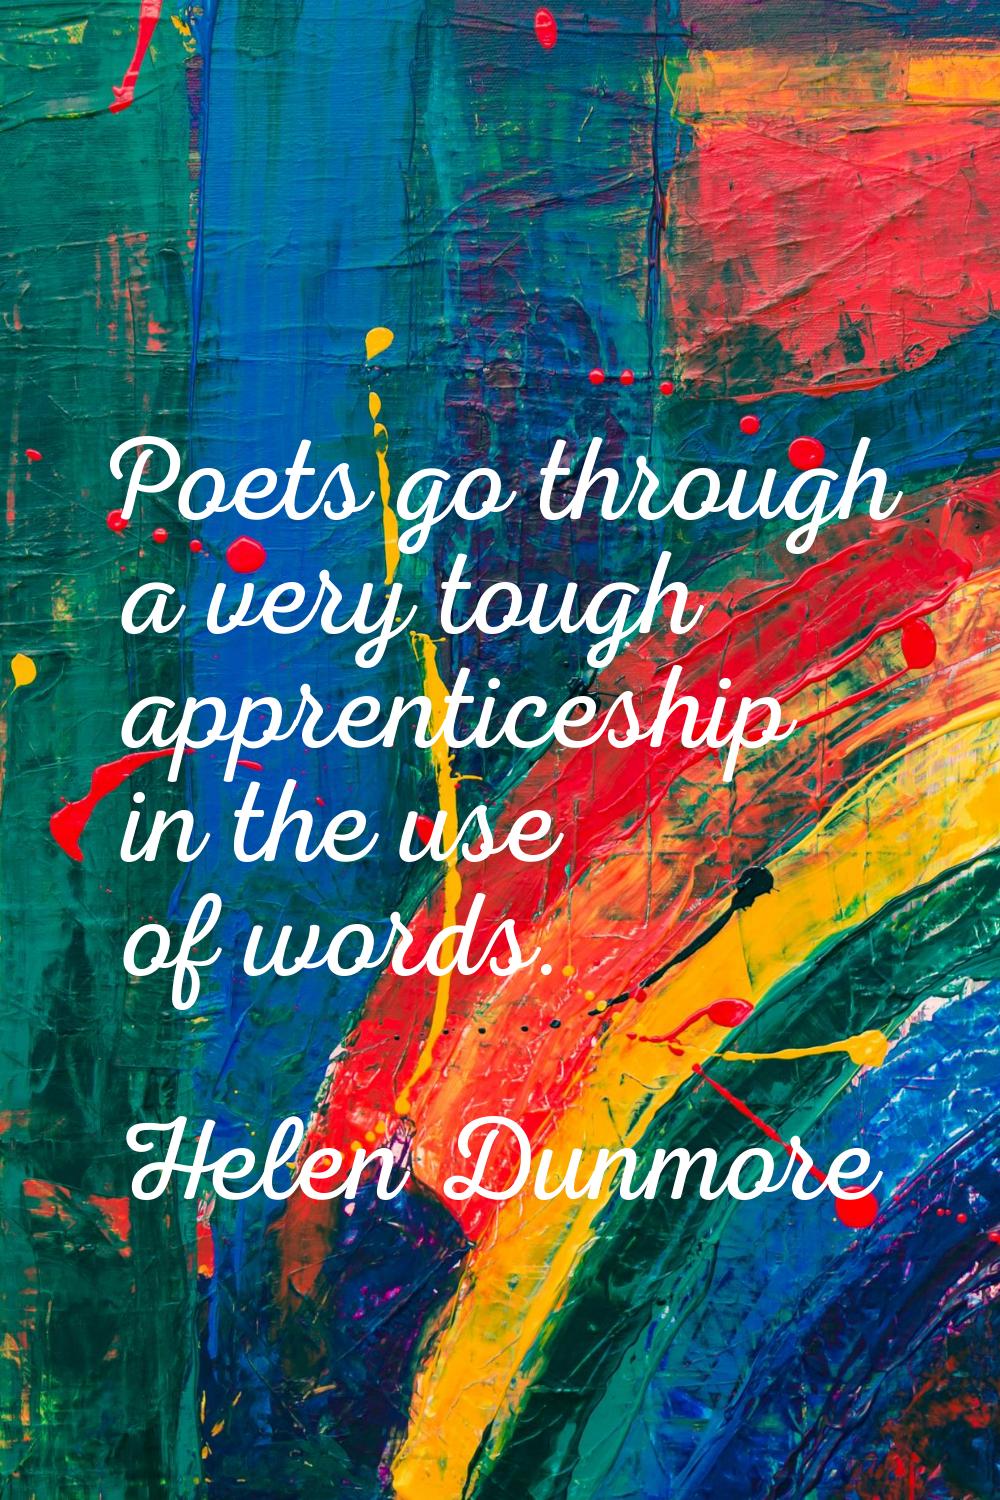 Poets go through a very tough apprenticeship in the use of words.